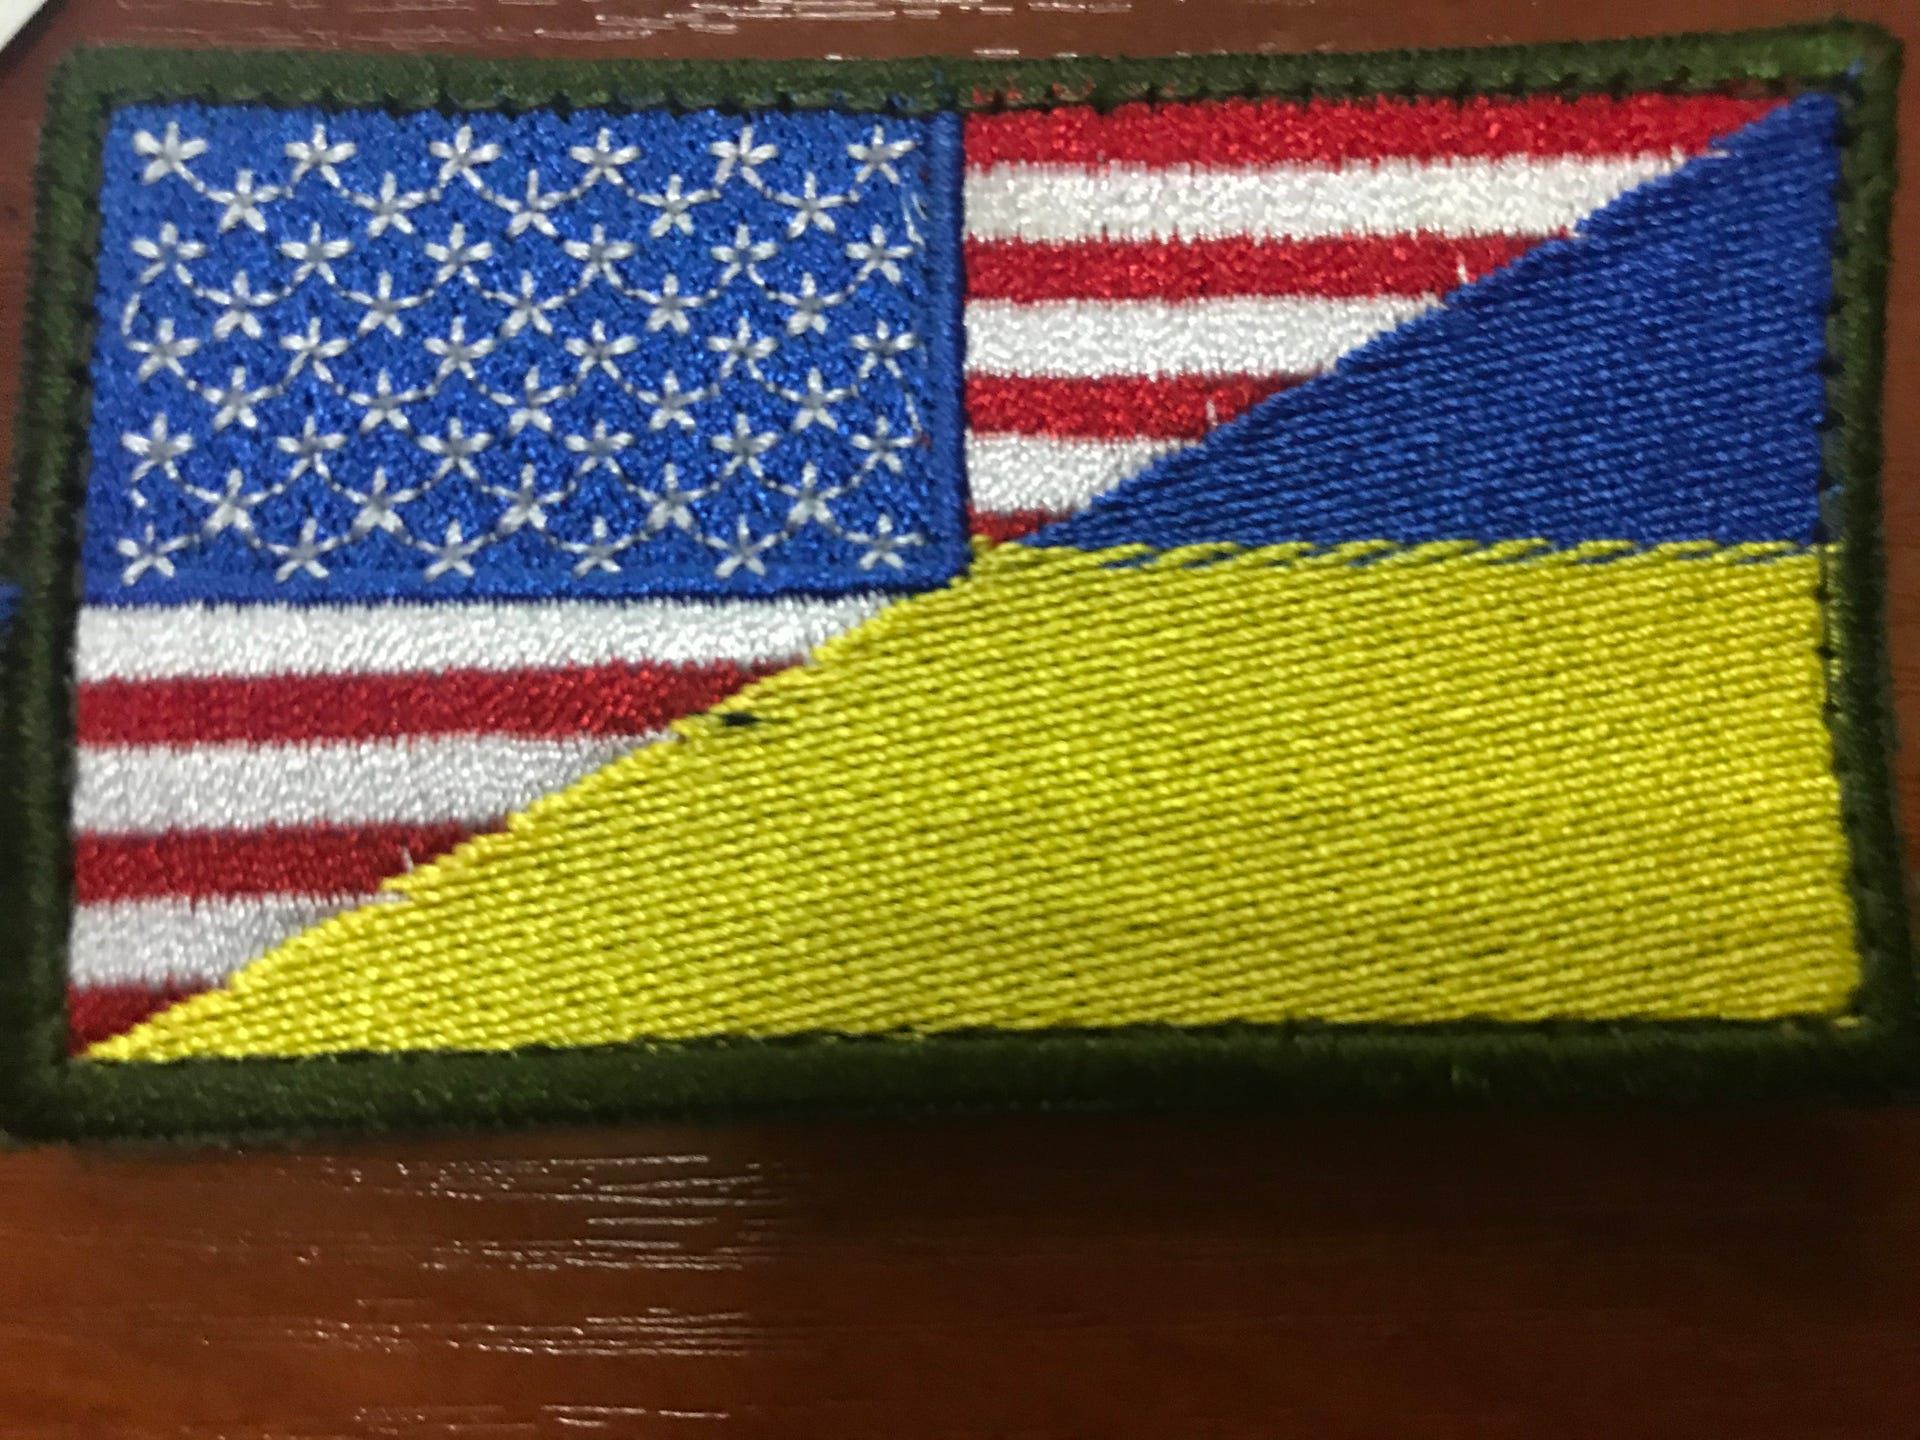 A patch featuring the American and Ukrainian flags at a combat training facility in western Ukraine. U.S. and coalition forces opened the training center a year after Russia invaded Crimea in eastern Ukraine. Image by Meg Jones / Milwaukee Journal Sentinel. Ukraine, 2020.